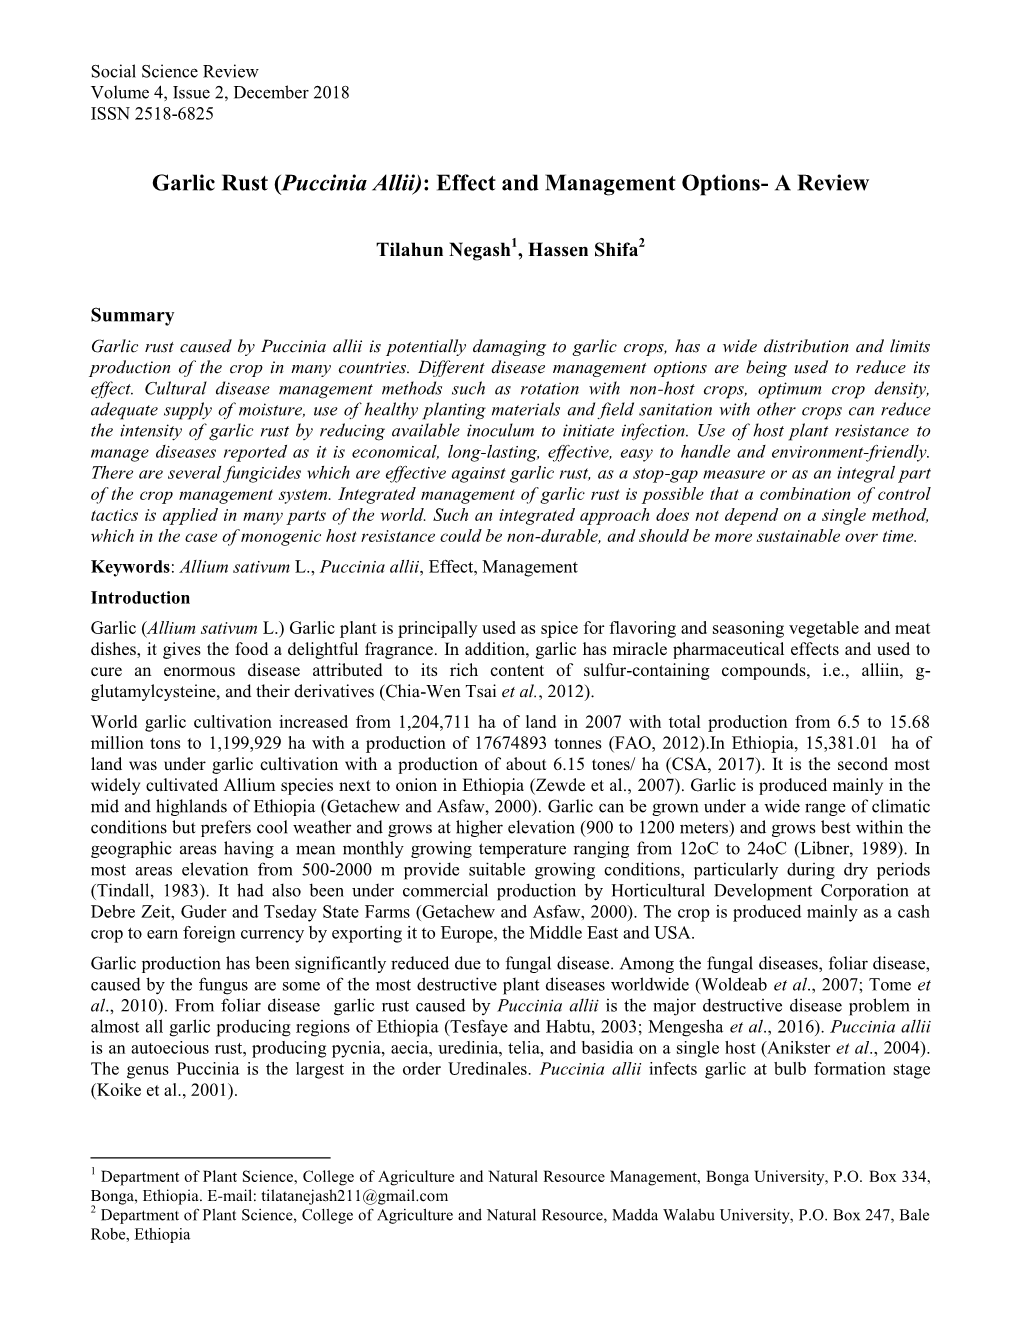 Garlic Rust (Puccinia Allii): Effect and Management Options- a Review